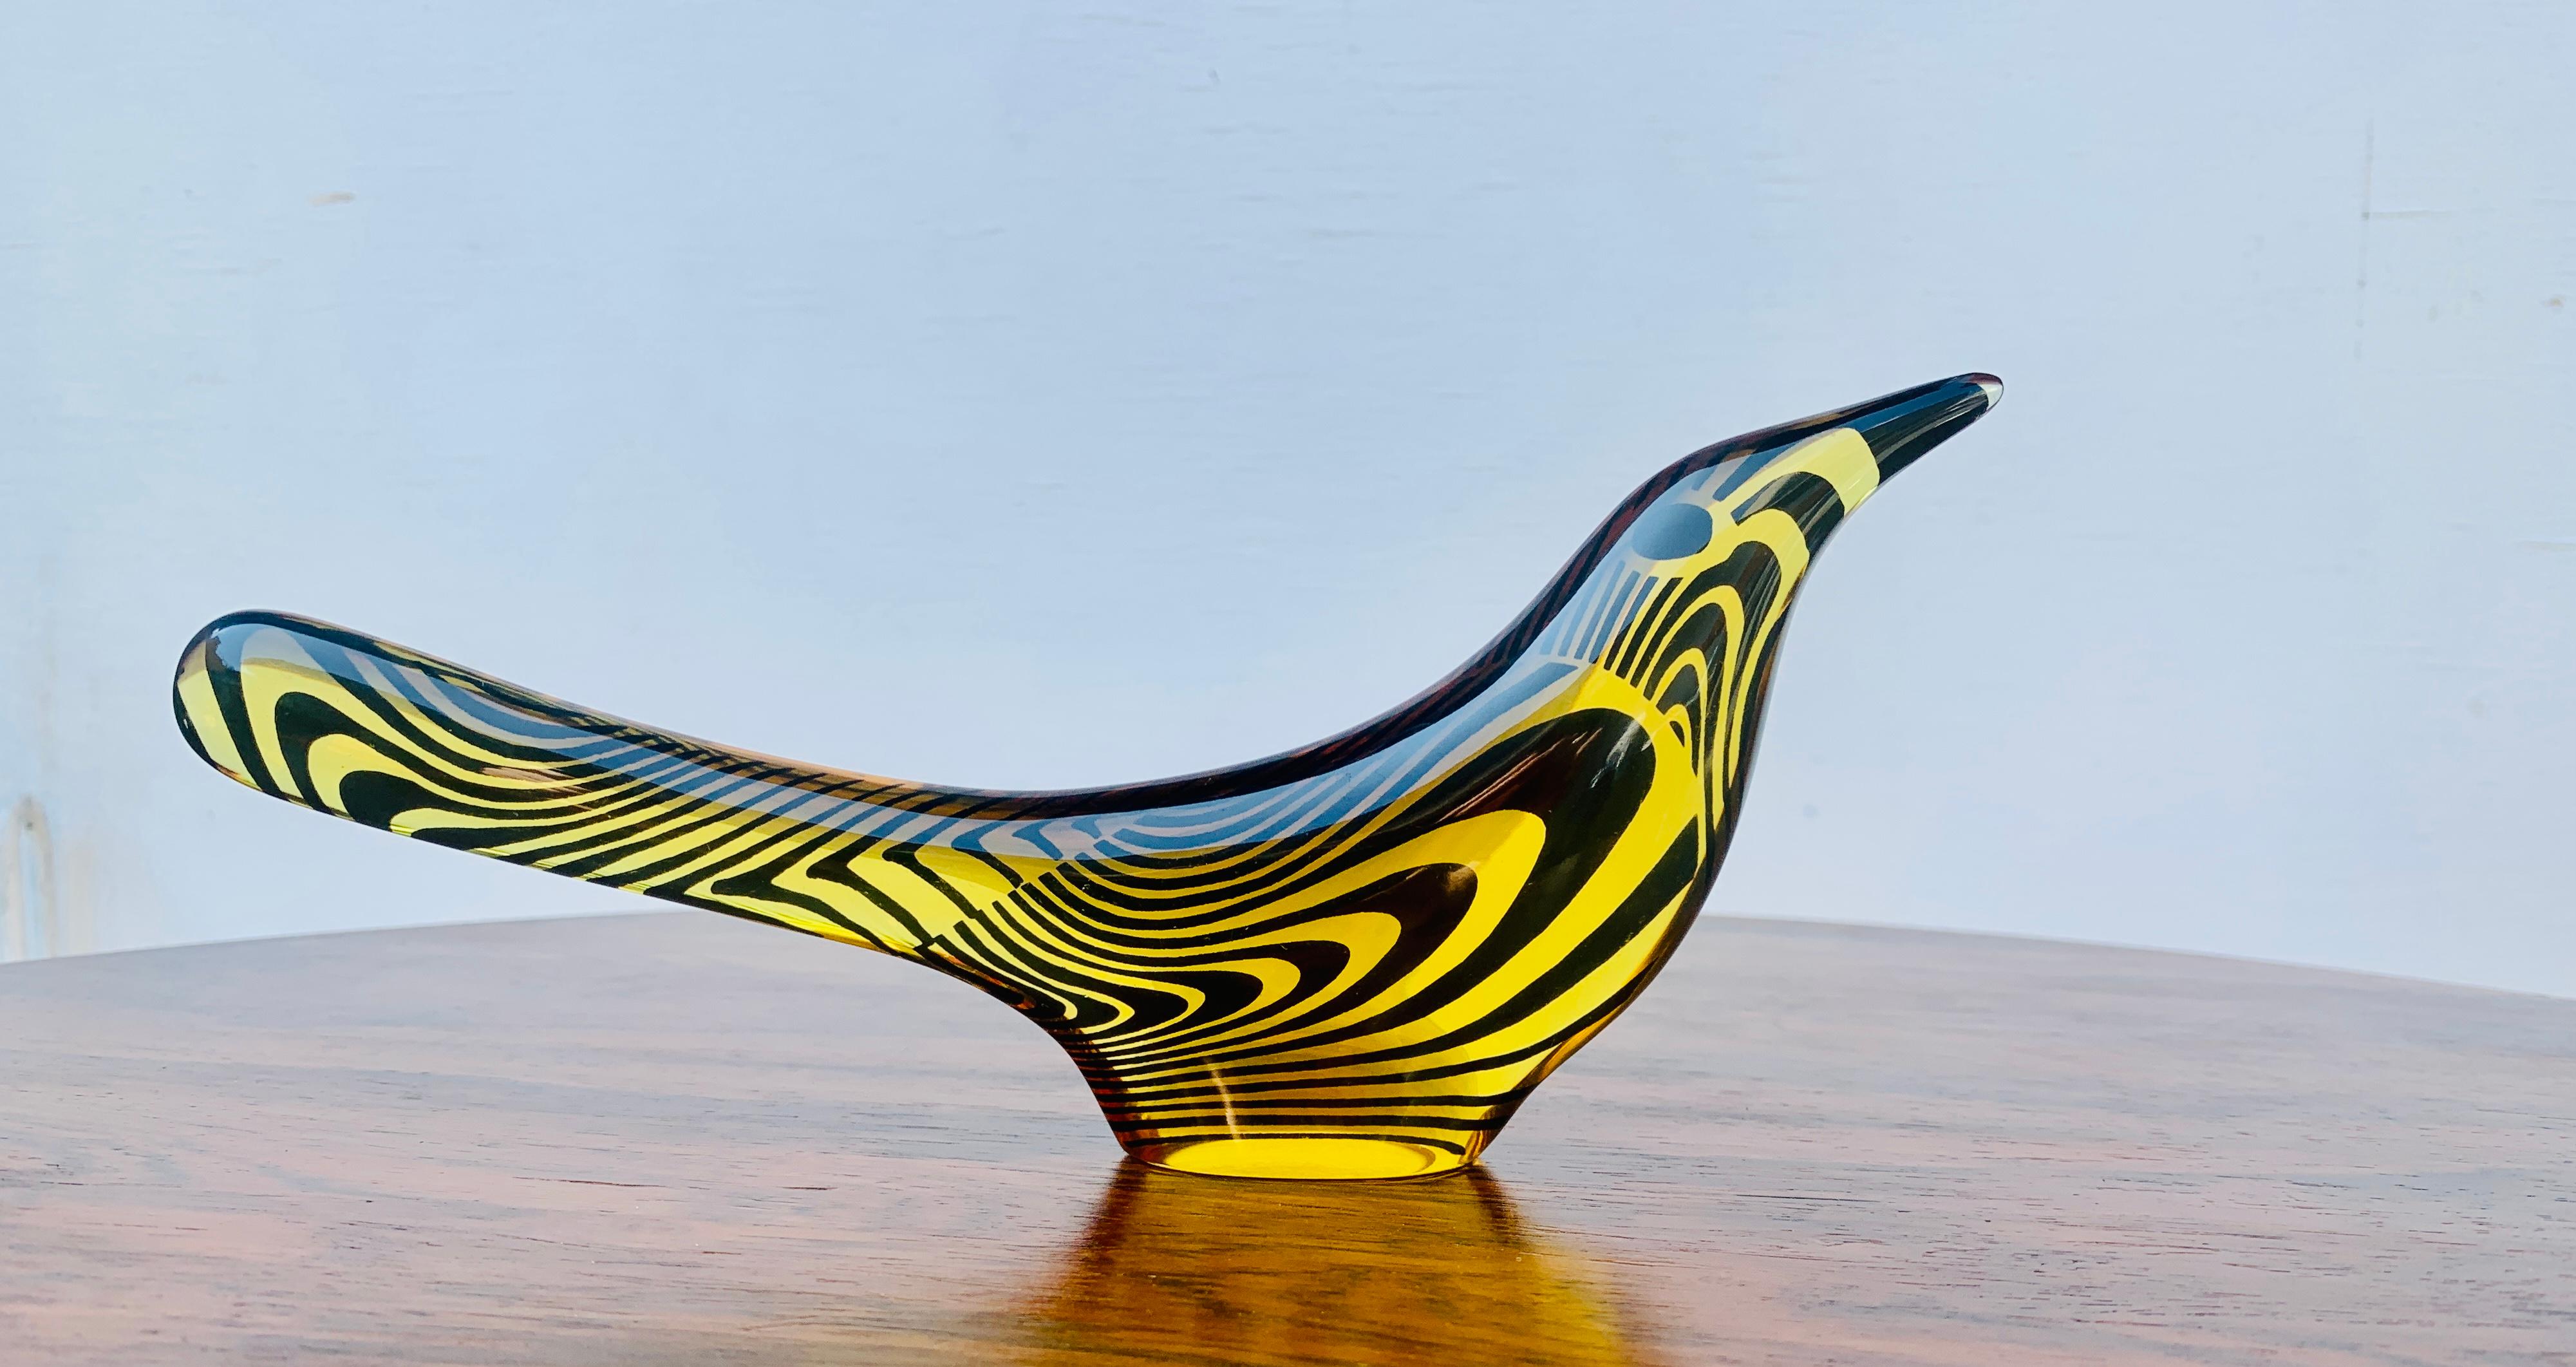 Abraham Palatnik (1928-2020)
Bird Sculpture, circa 1960
Polyester resin and pigments.
Measures: (21.5 x 9.5 x 2.5 cm)
This Polyester resin sculpture representing a bird, in the colors yellow and black 
It is part of the series of animal